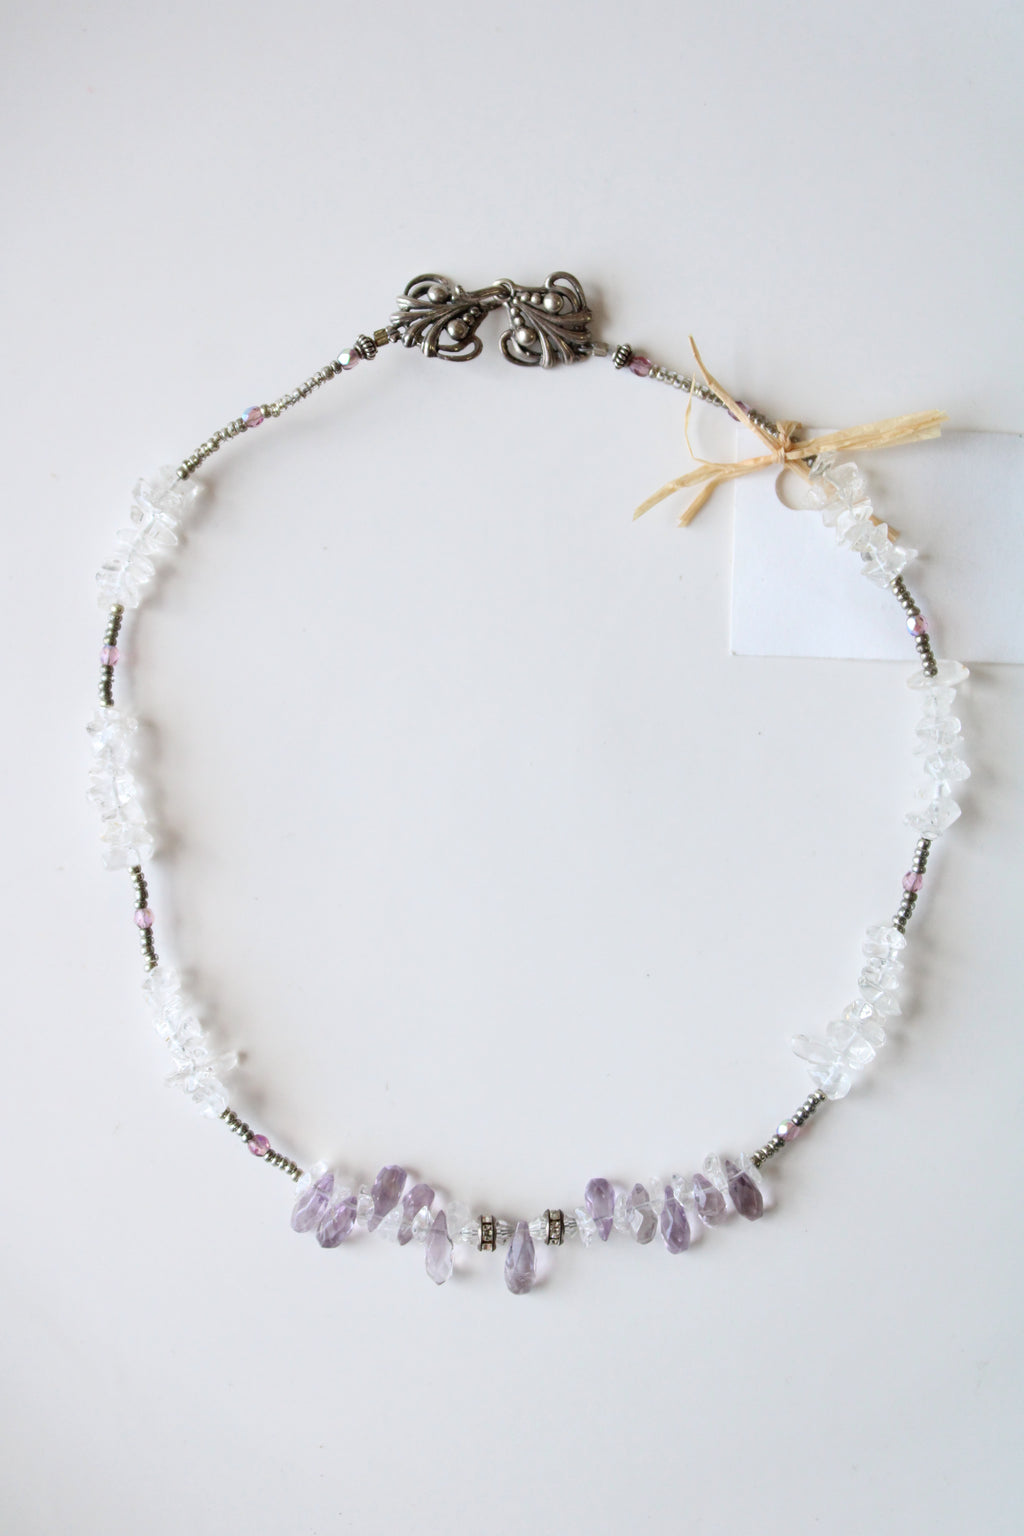 NEW Amethyst & Crystal Sterling Silver Beaded Necklace